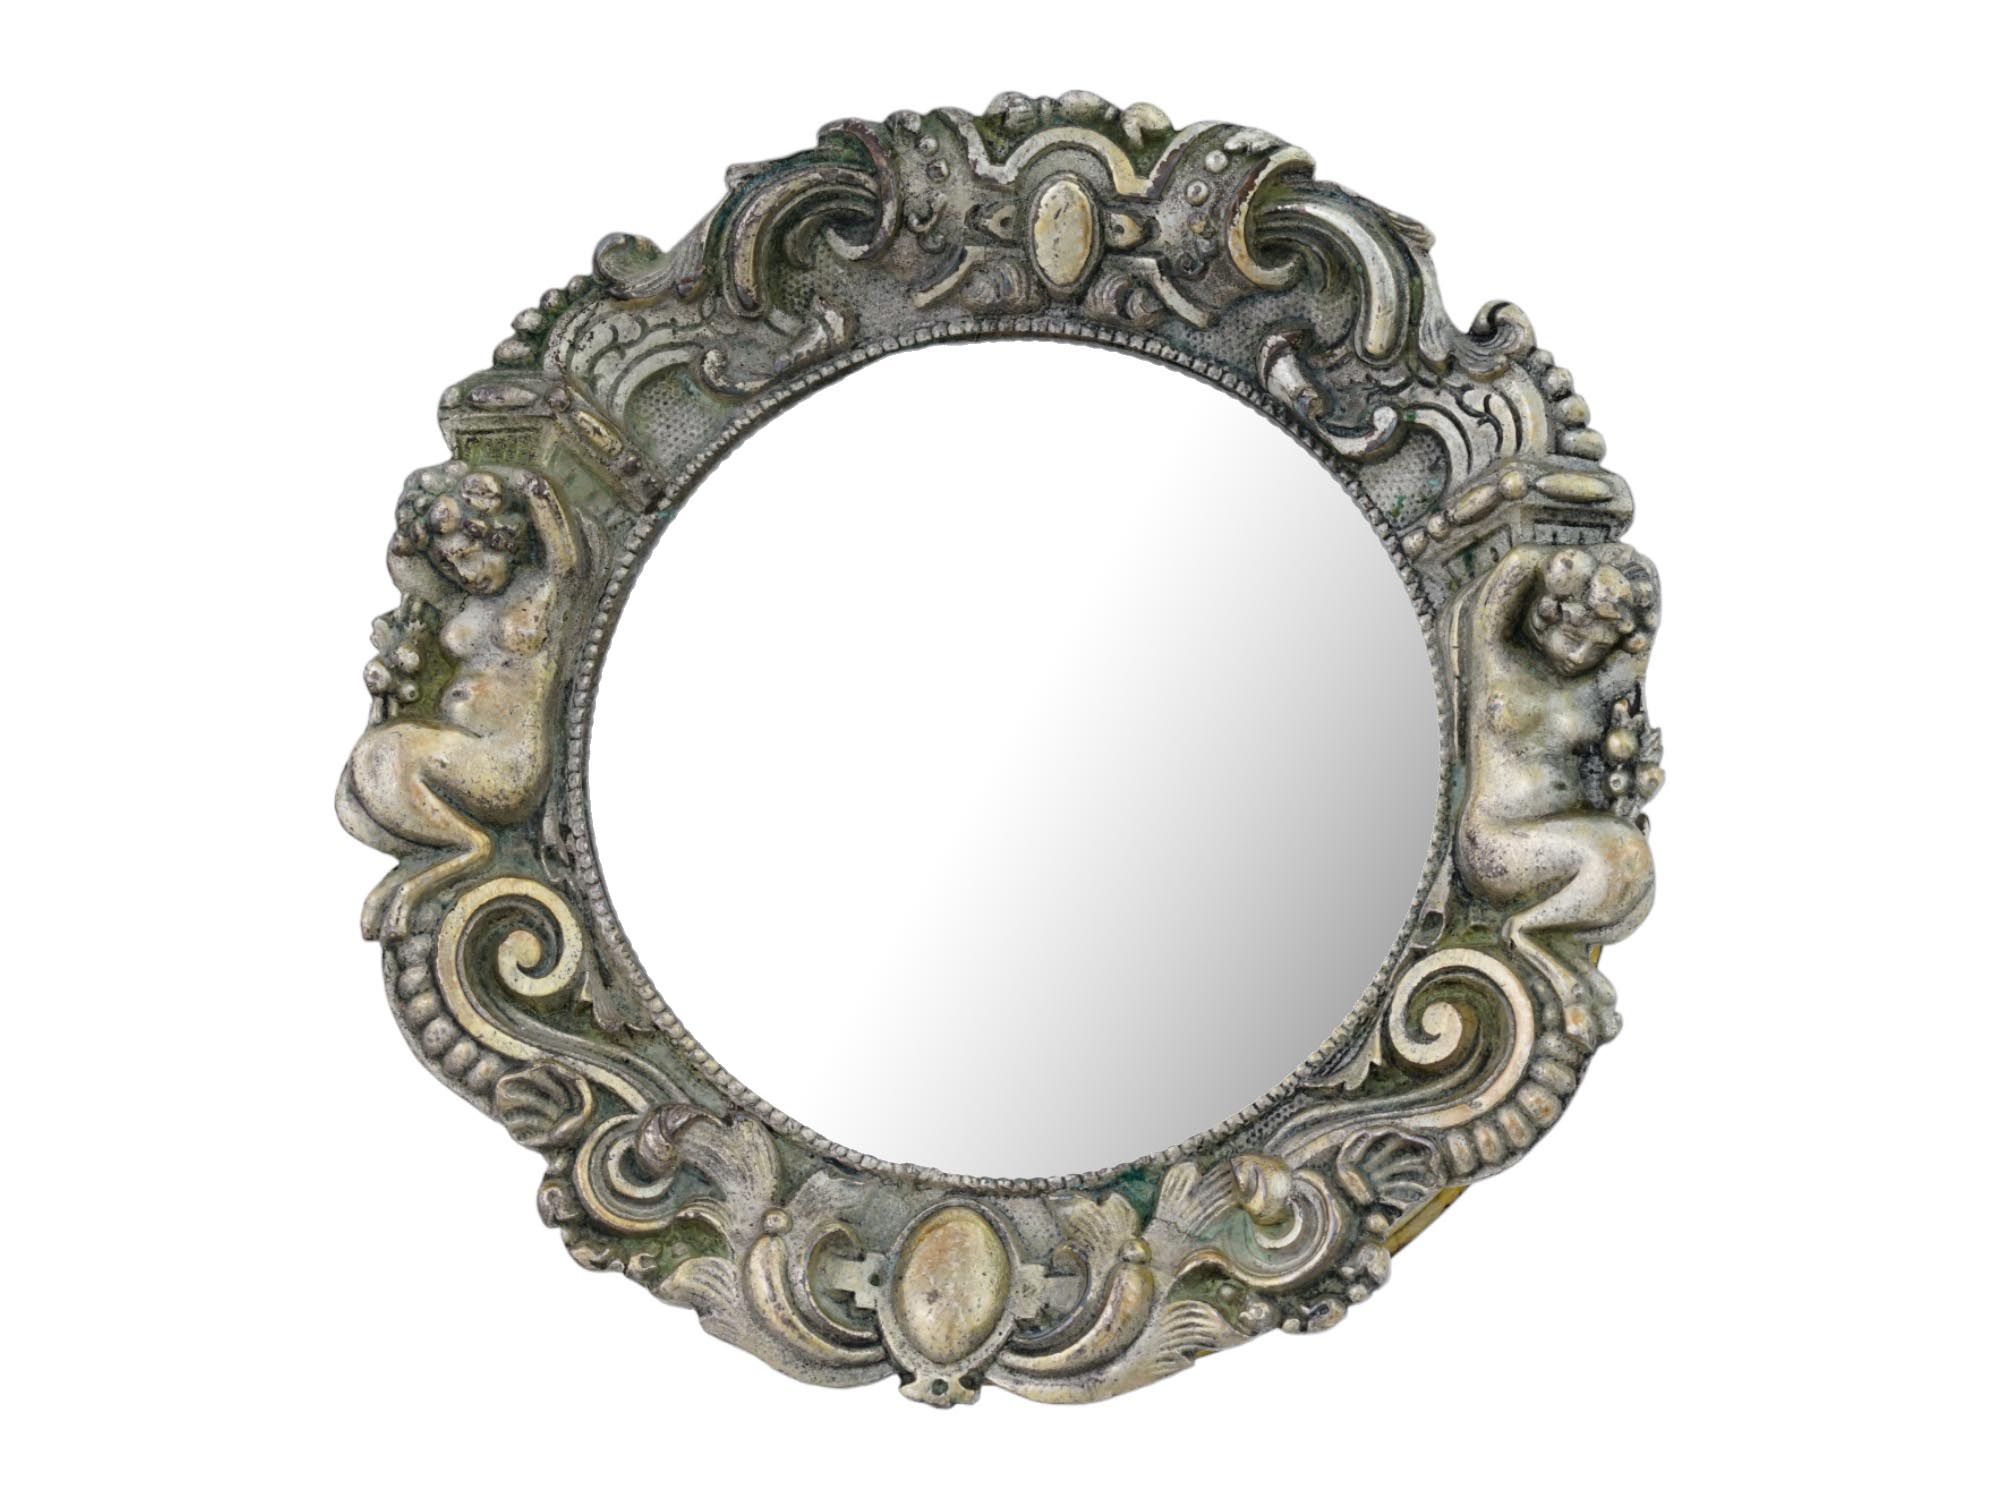 ANTIQUE BAROQUE ORNATE SILVERED BRONZE WALL MIRROR PIC-0